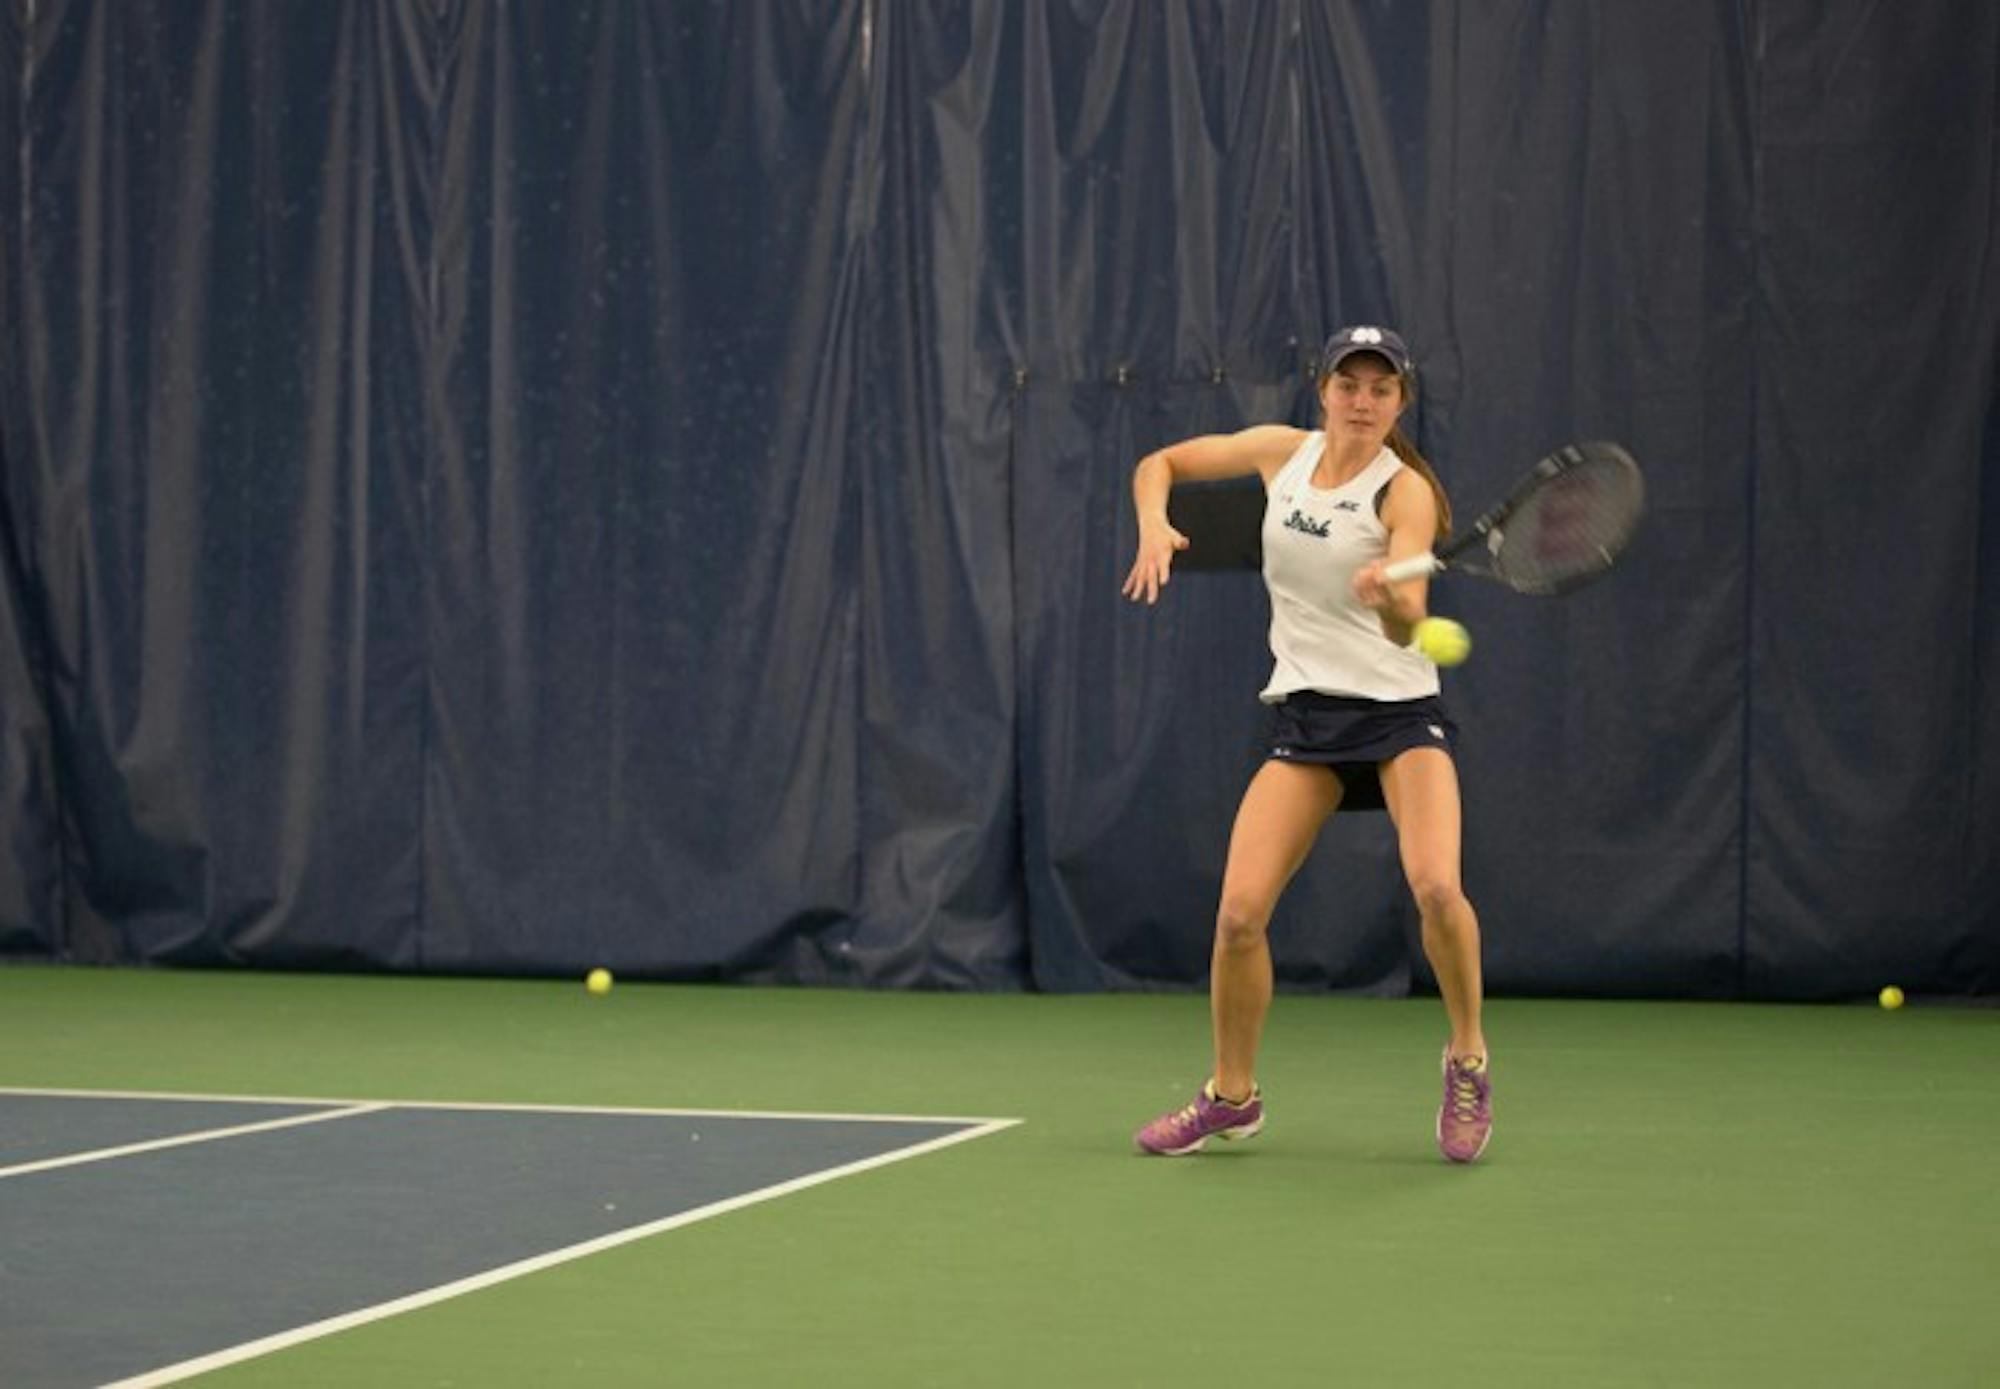 Irish junior Mary Closs fires a forehand during Notre Dame’s 6-1 loss to Stanford on Feb. 6 at Eck Tennis Pavilion.